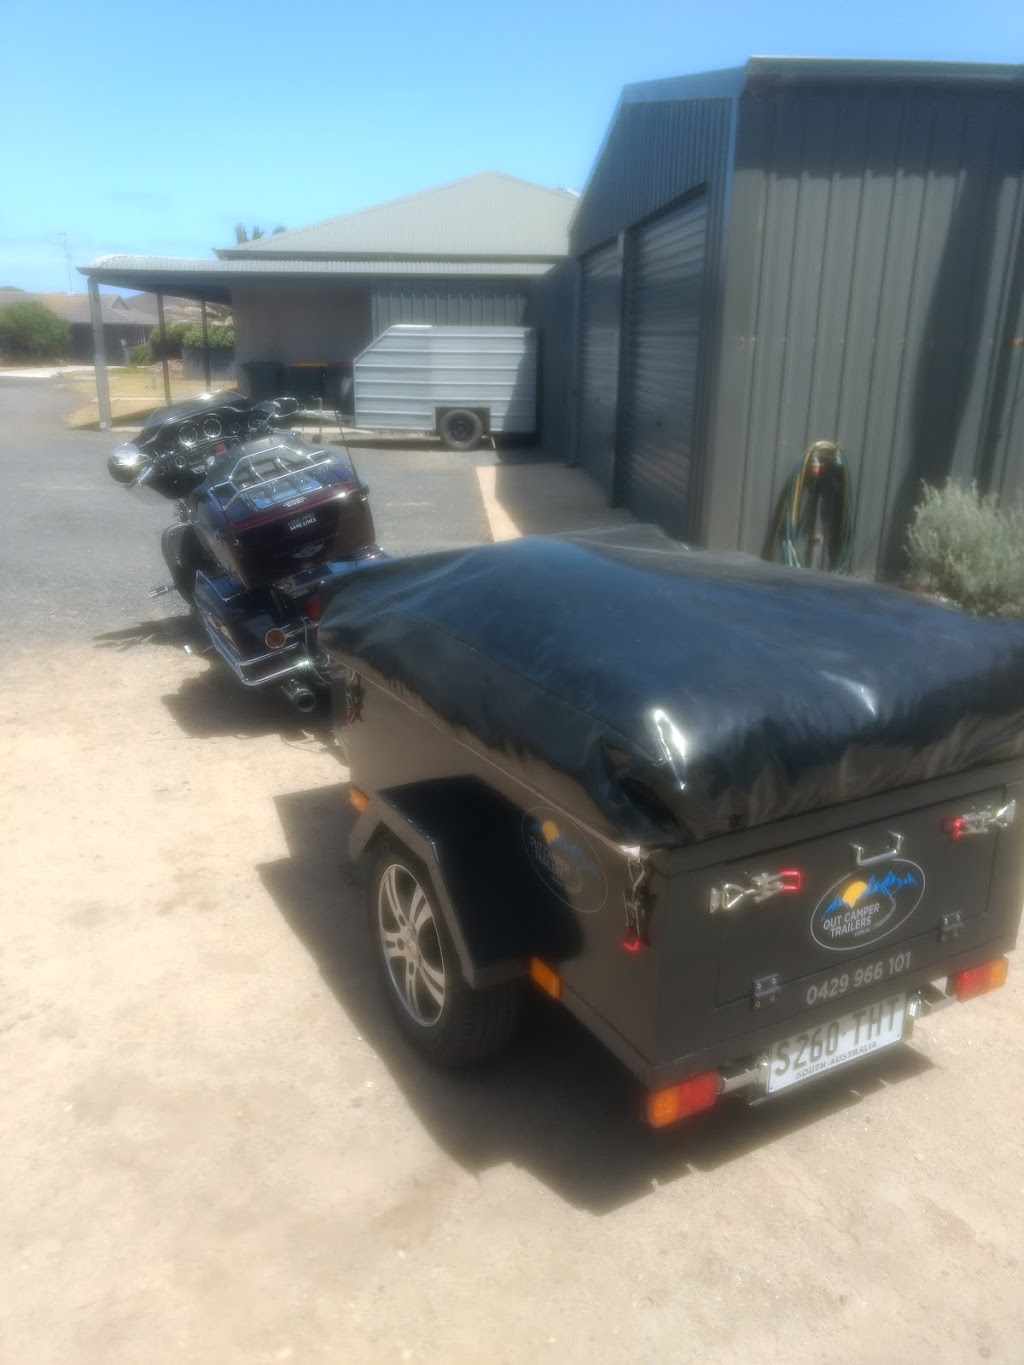 out camper trailers | 3, Port Macdonnell SA 5291, Australia | Phone: 0429 966 101